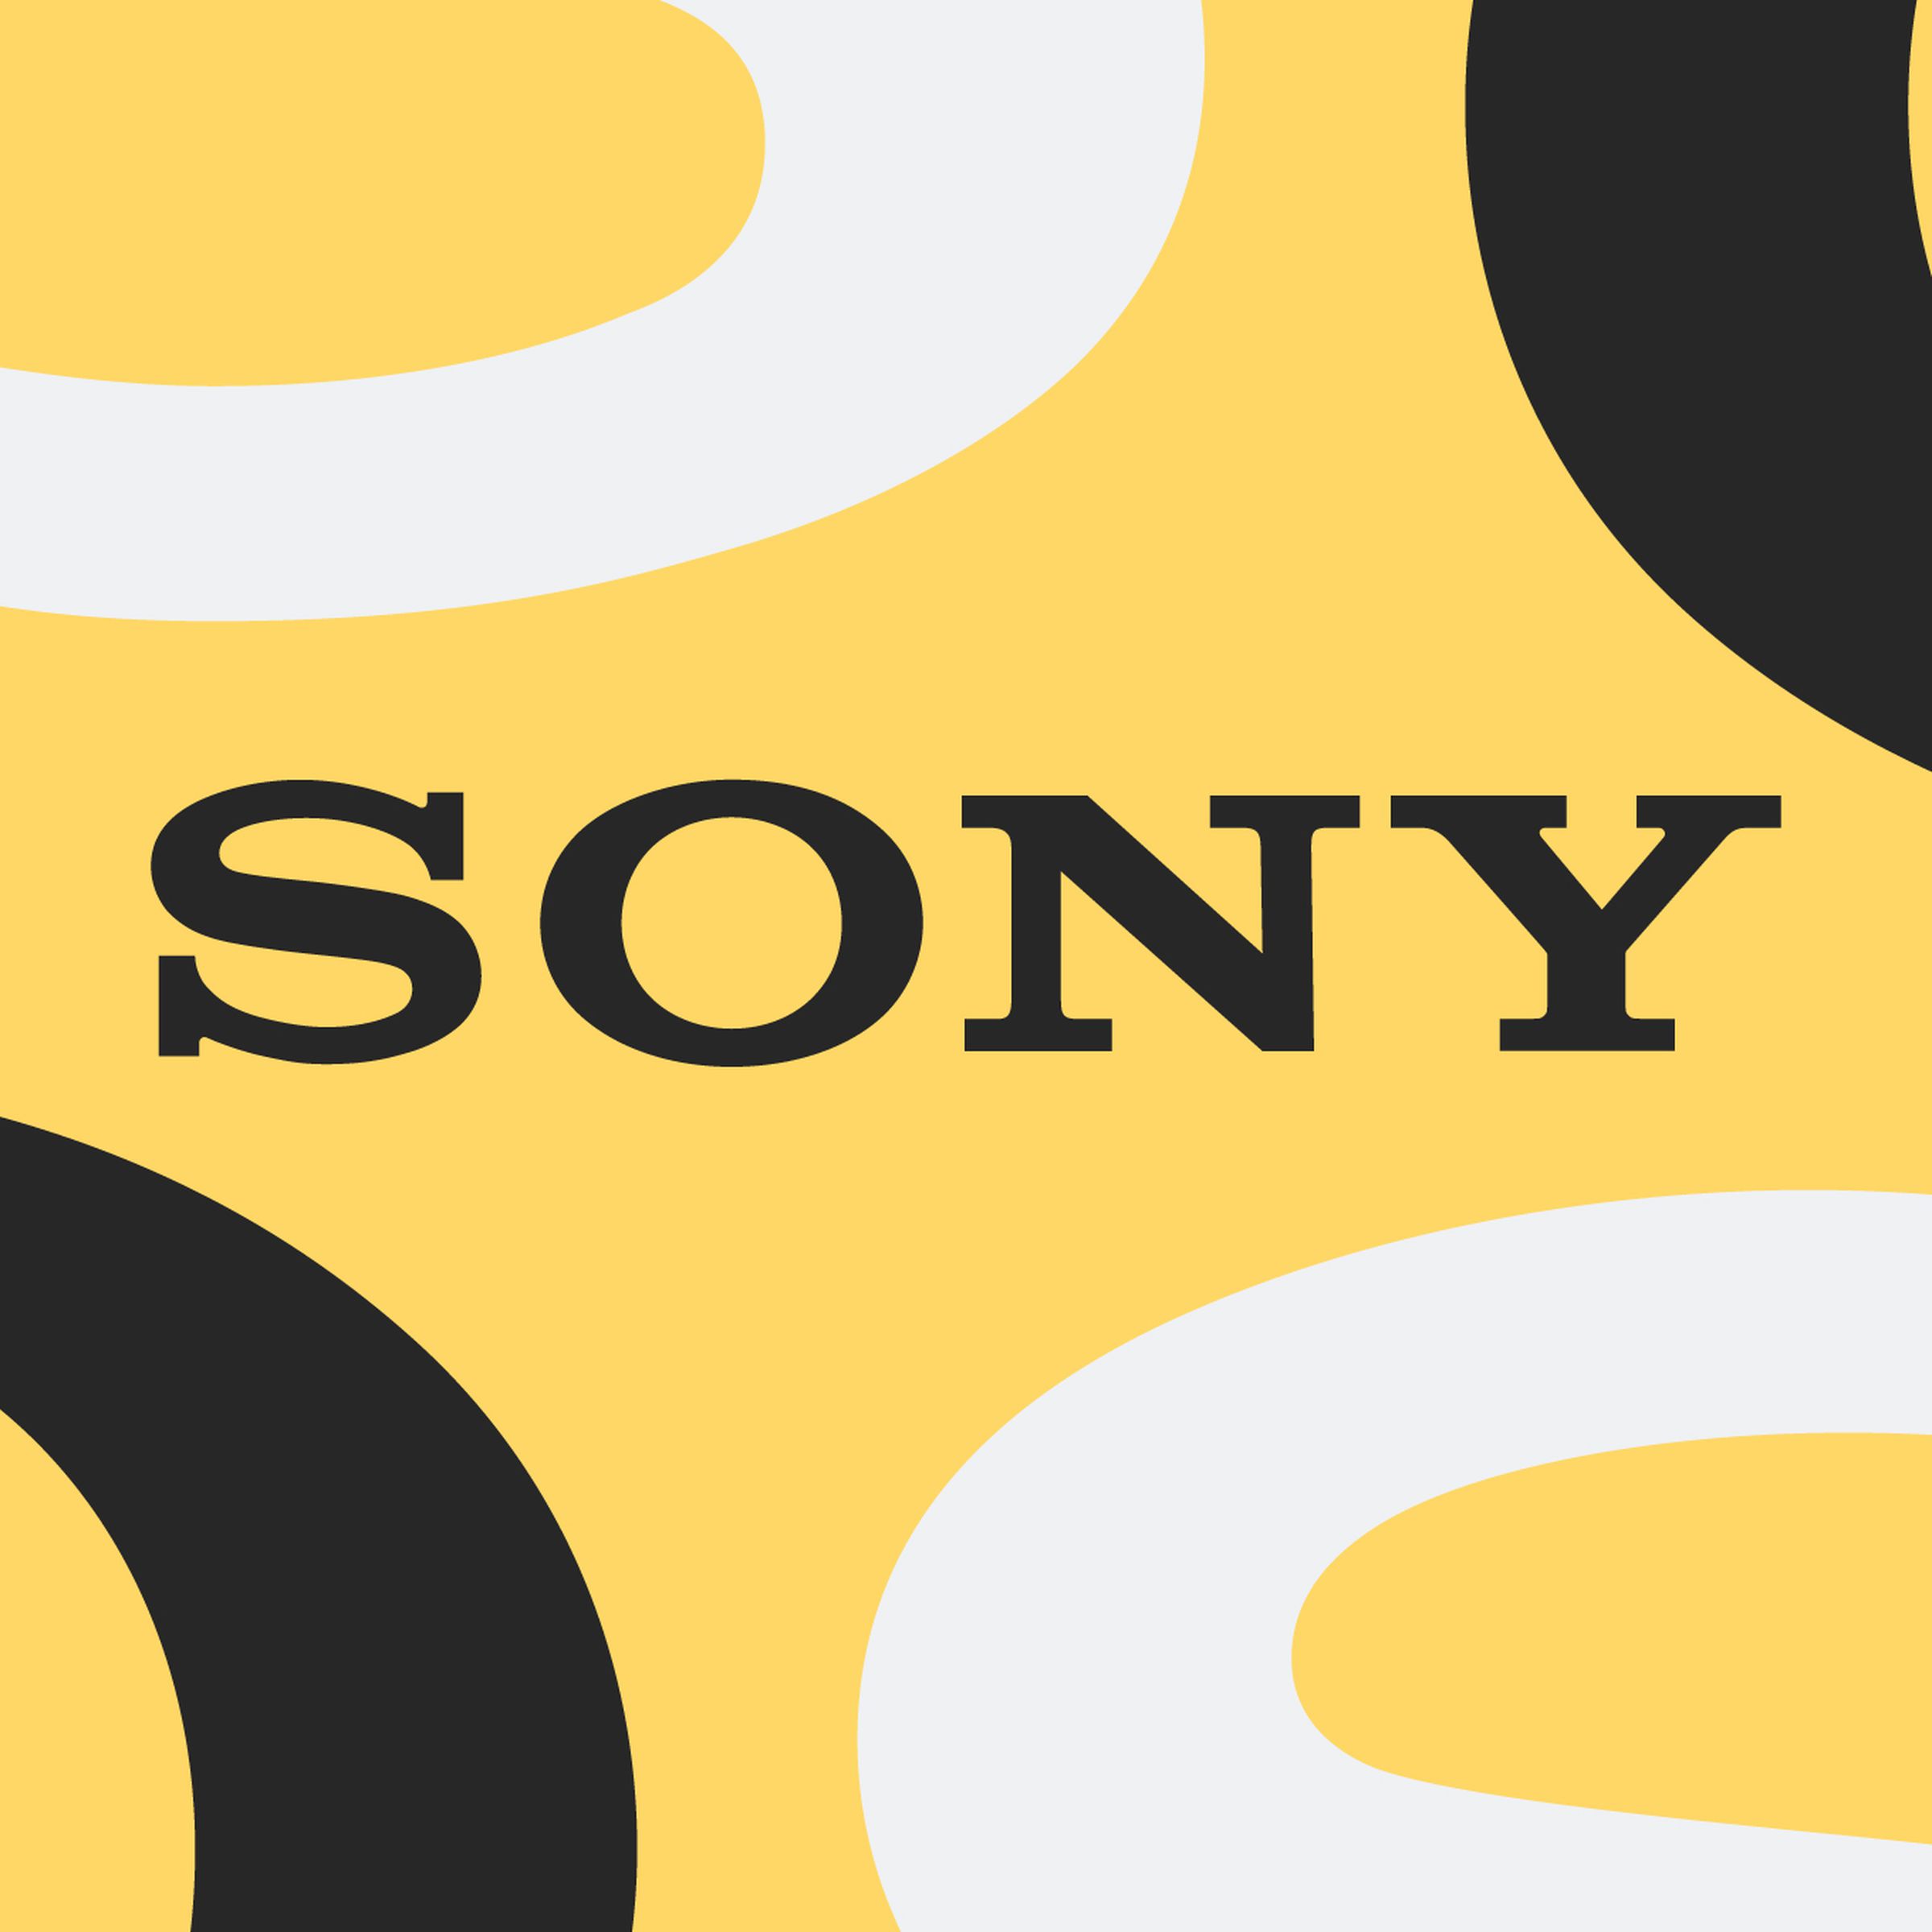 An illustration featuring the Sony logo.